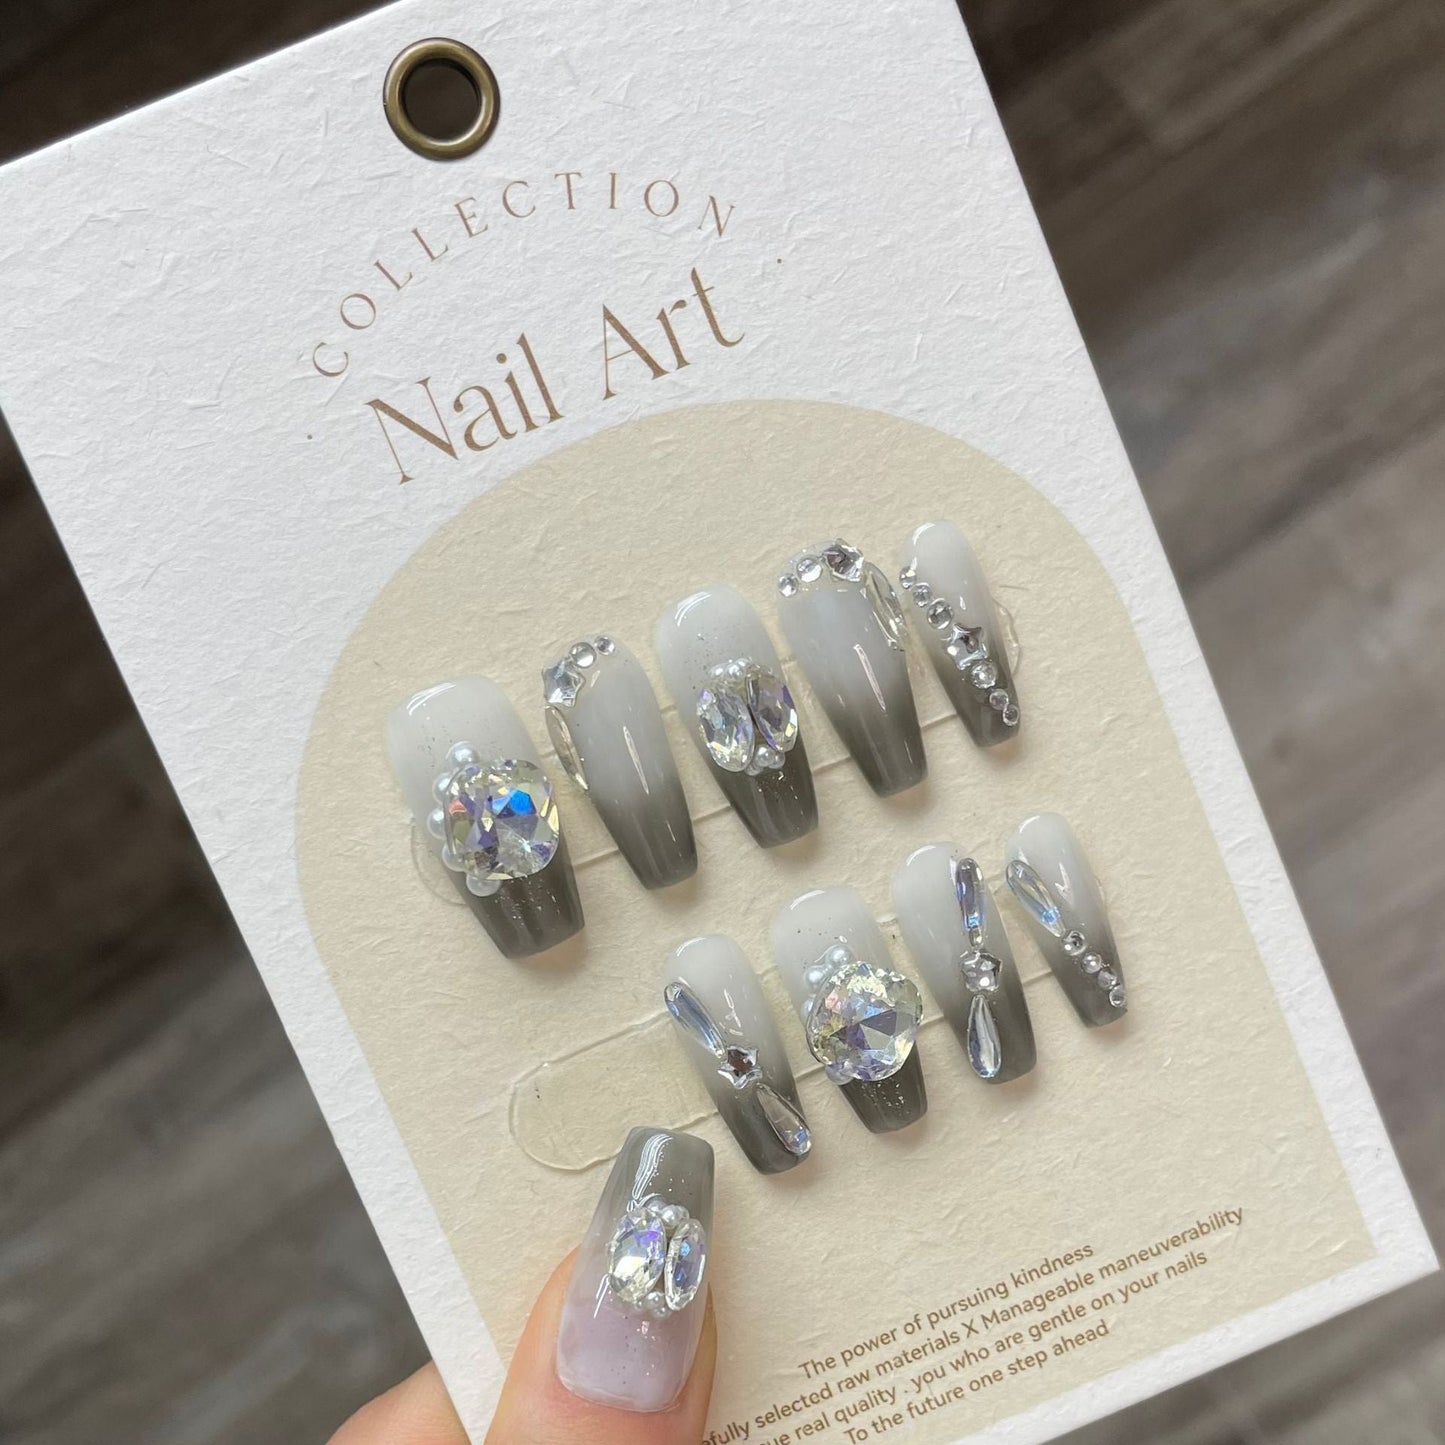 847 Presse style strass sur ongles 100% faux ongles faits main gris